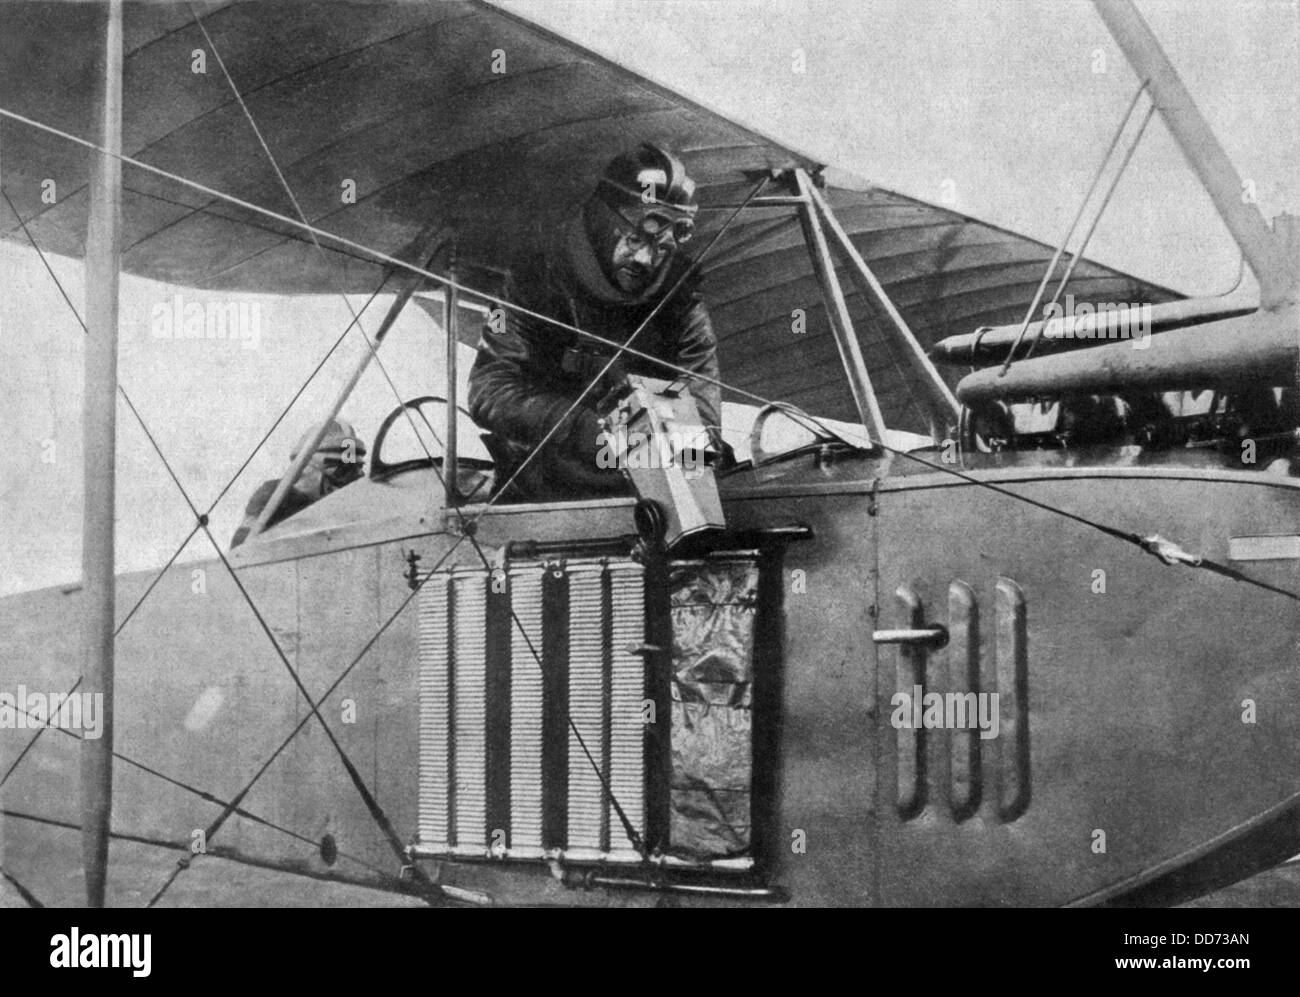 German WW1 observer photographs from an airplane. 1914-18. (BSLOC 2012 4 131) Stock Photo